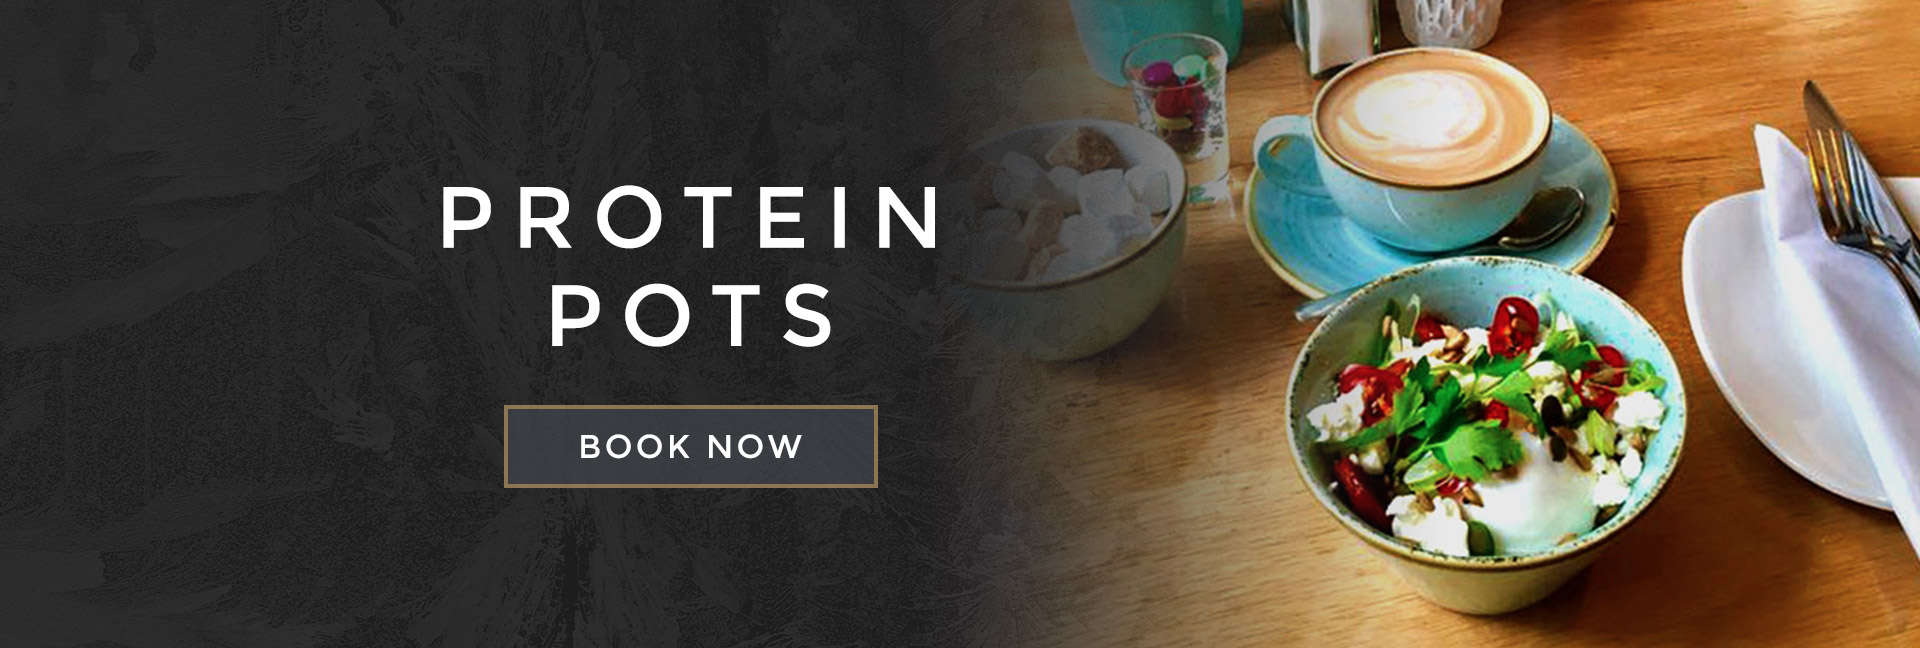 Protein pots at All Bar One Sheffield - Book your table